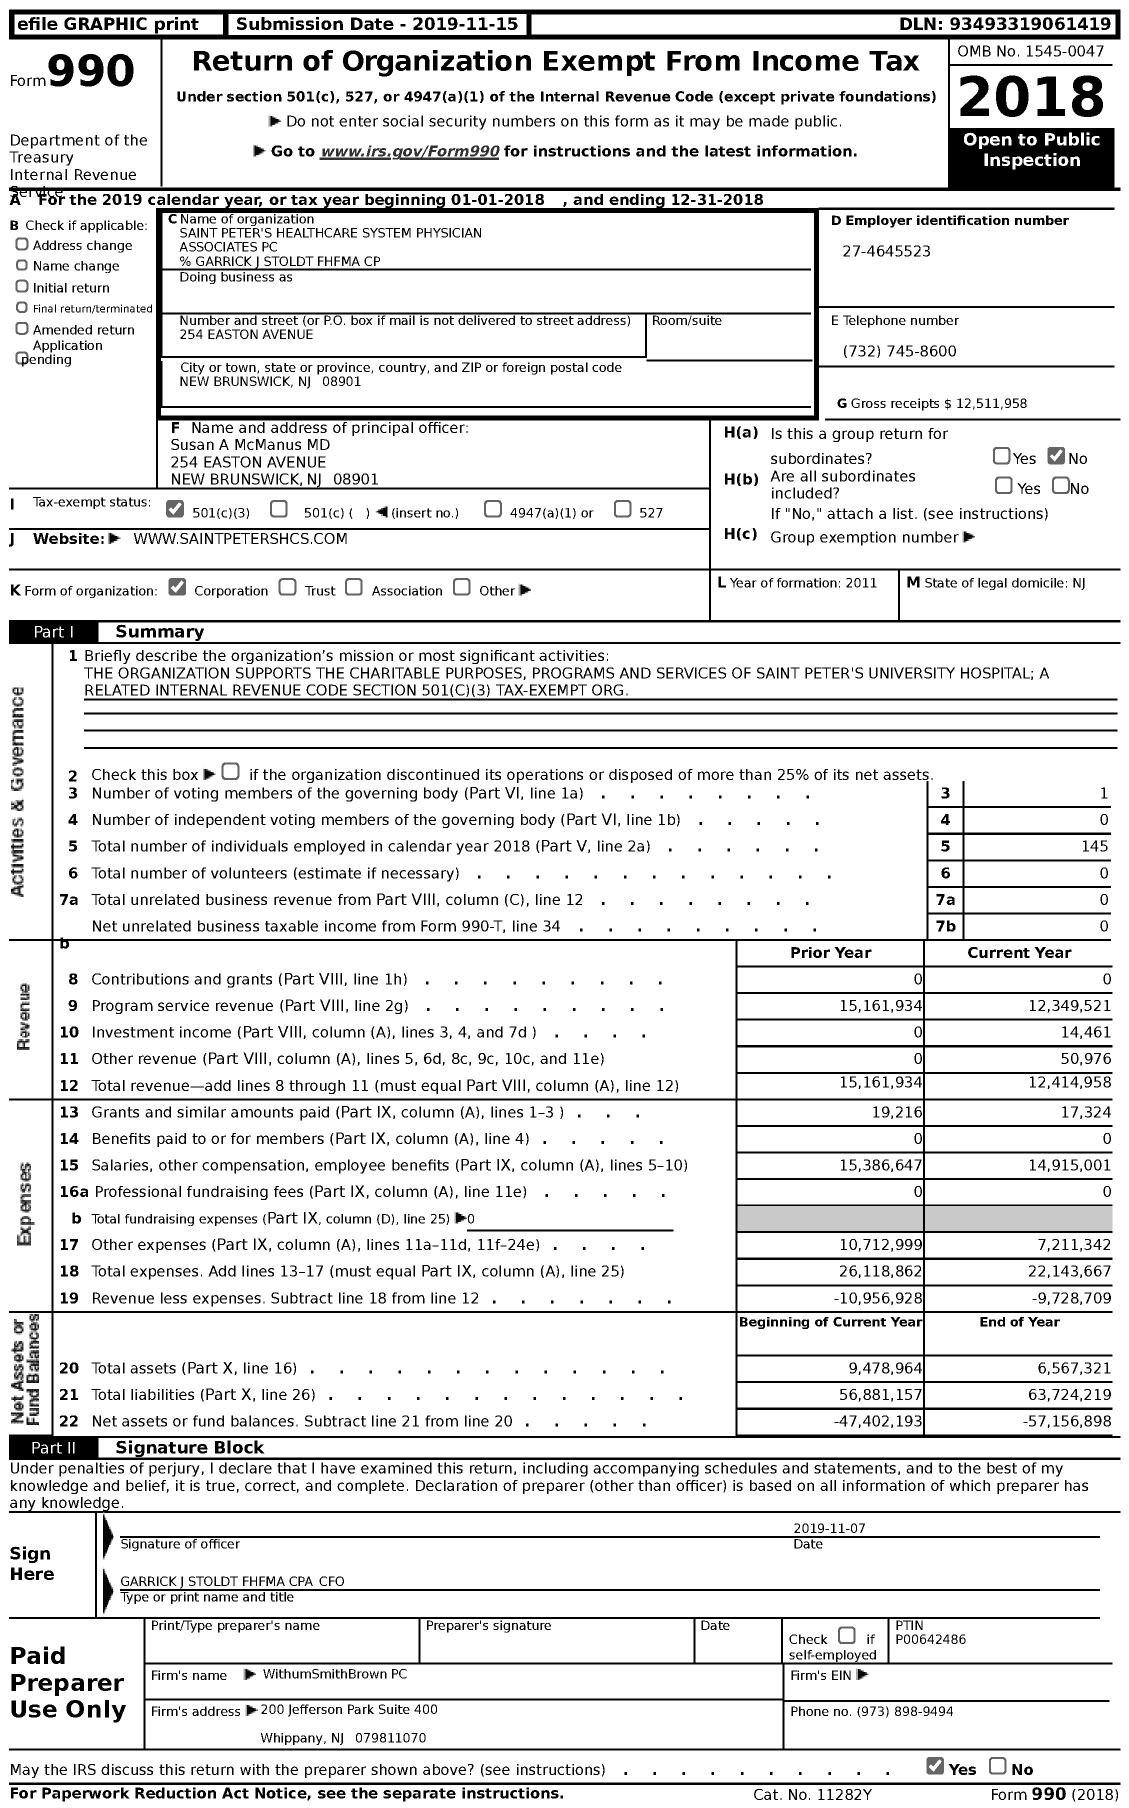 Image of first page of 2018 Form 990 for Saint Peter's Healthcare System Physician Associates PC